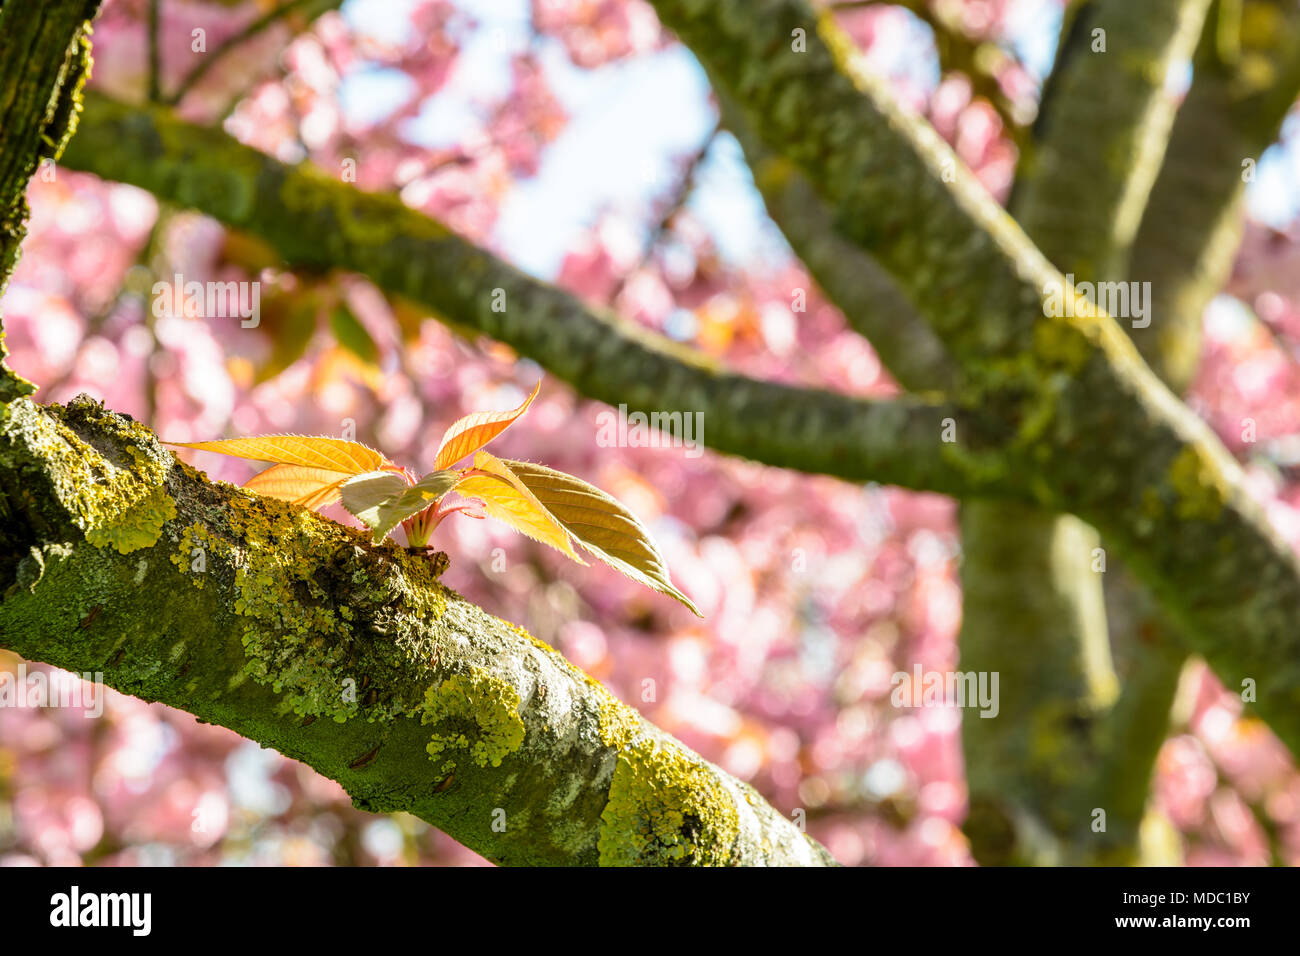 Close-up view of a young shoot on a branch a Japanese cherry tree with blurry pink flowers in the background. Stock Photo